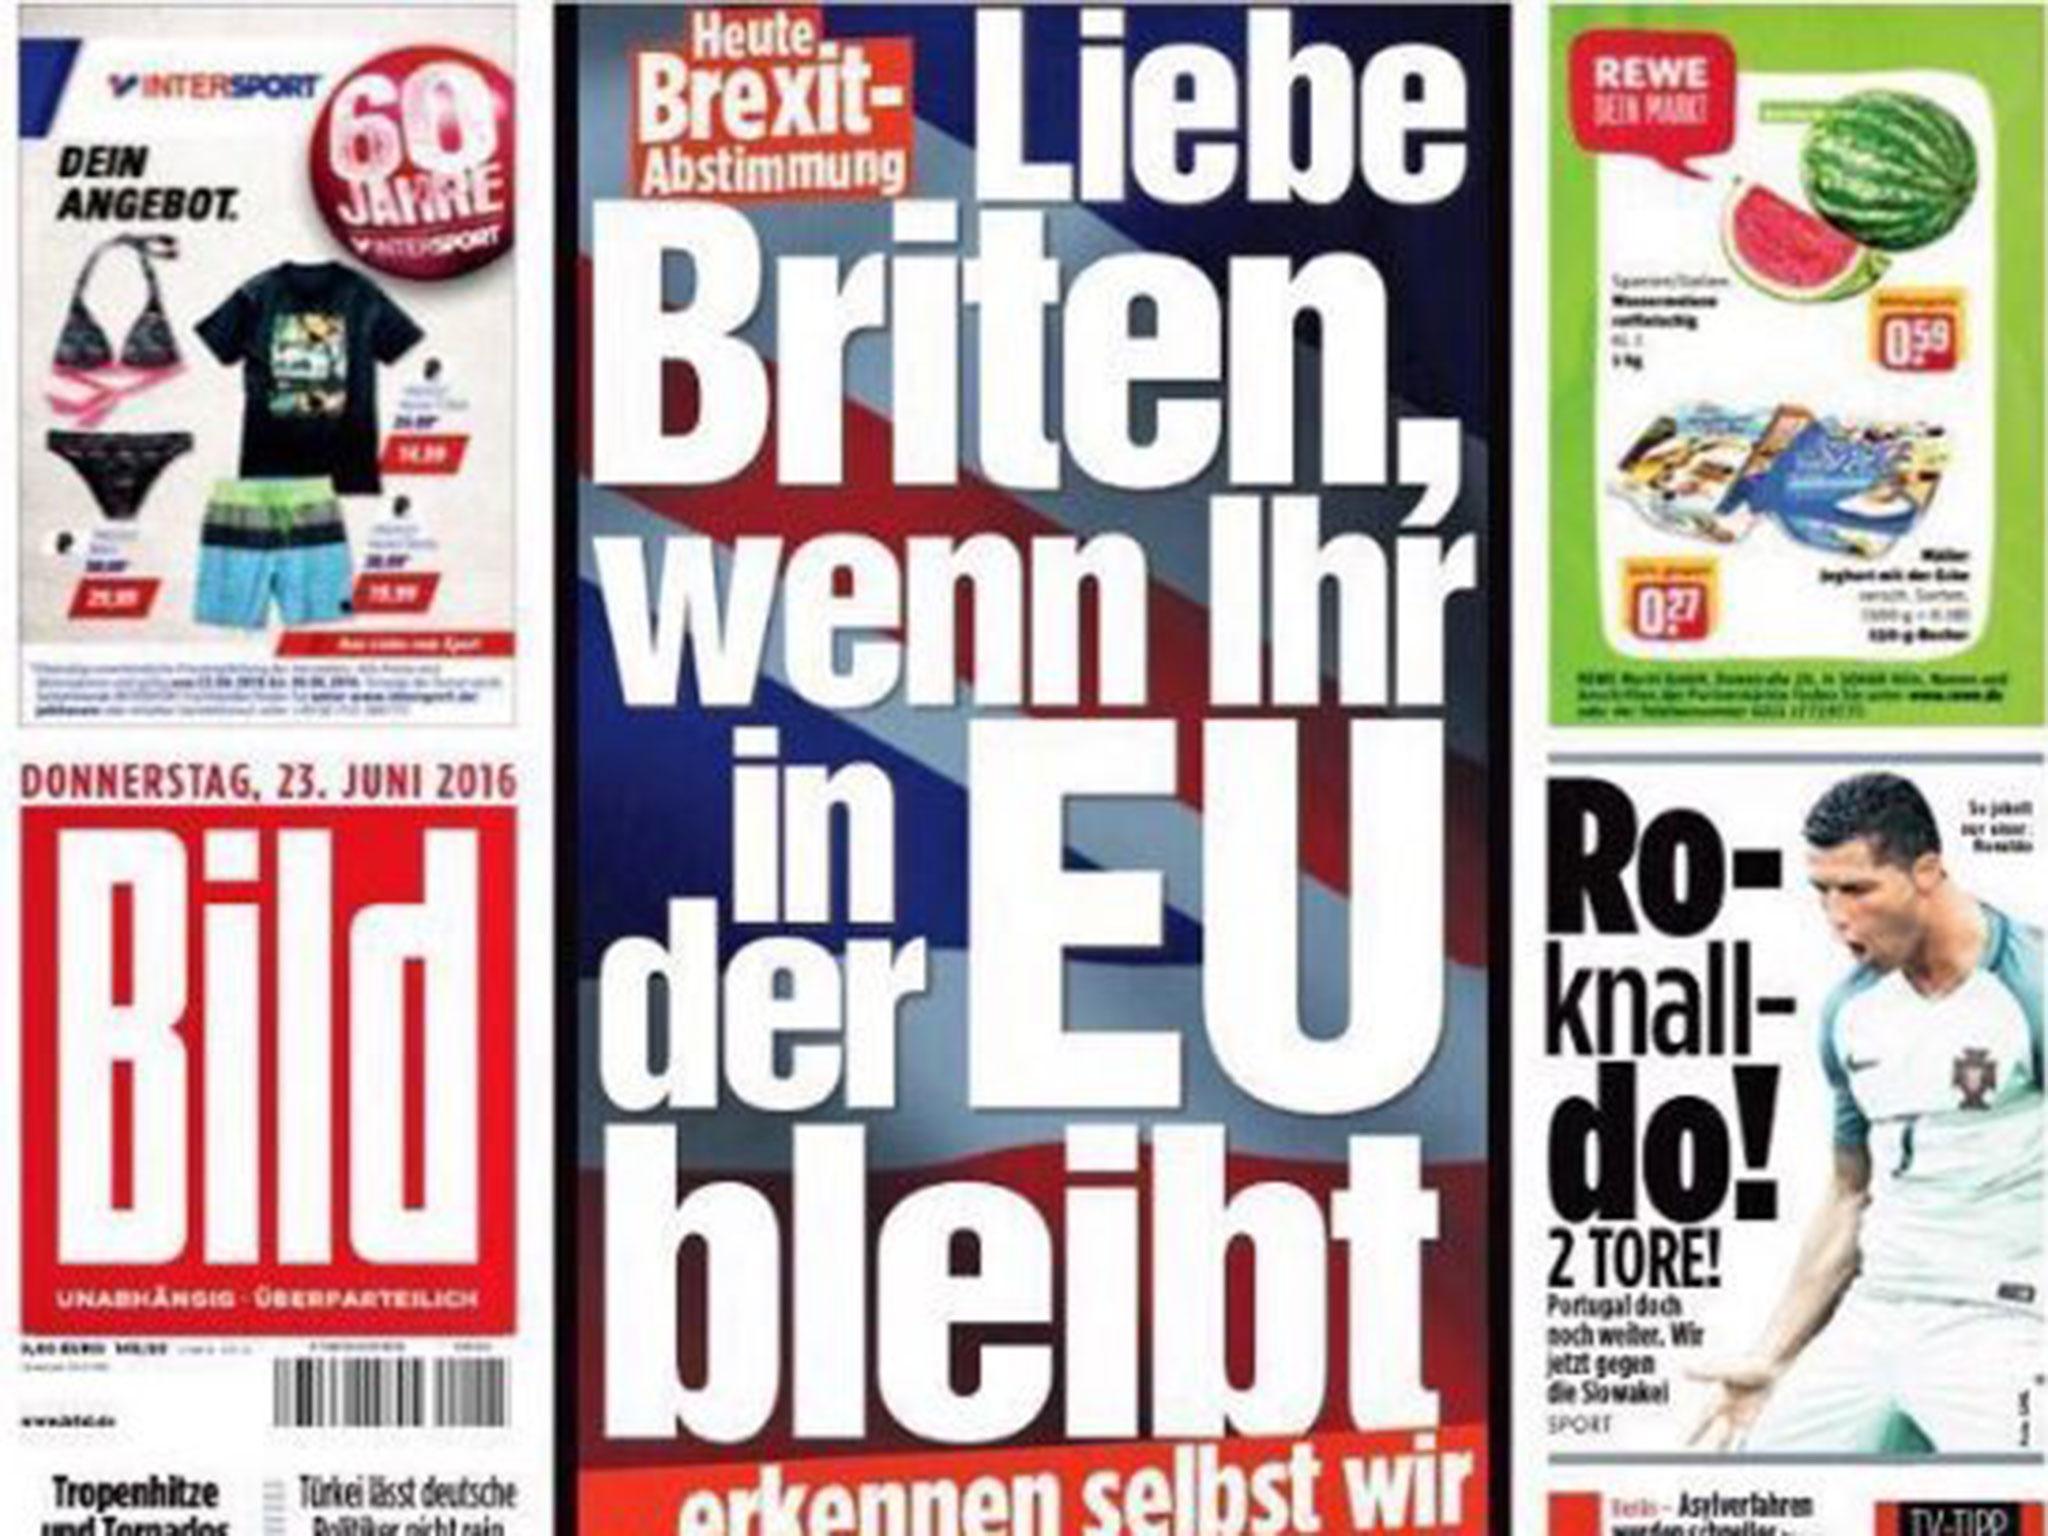 Bild's open letter to the UK quickly went viral